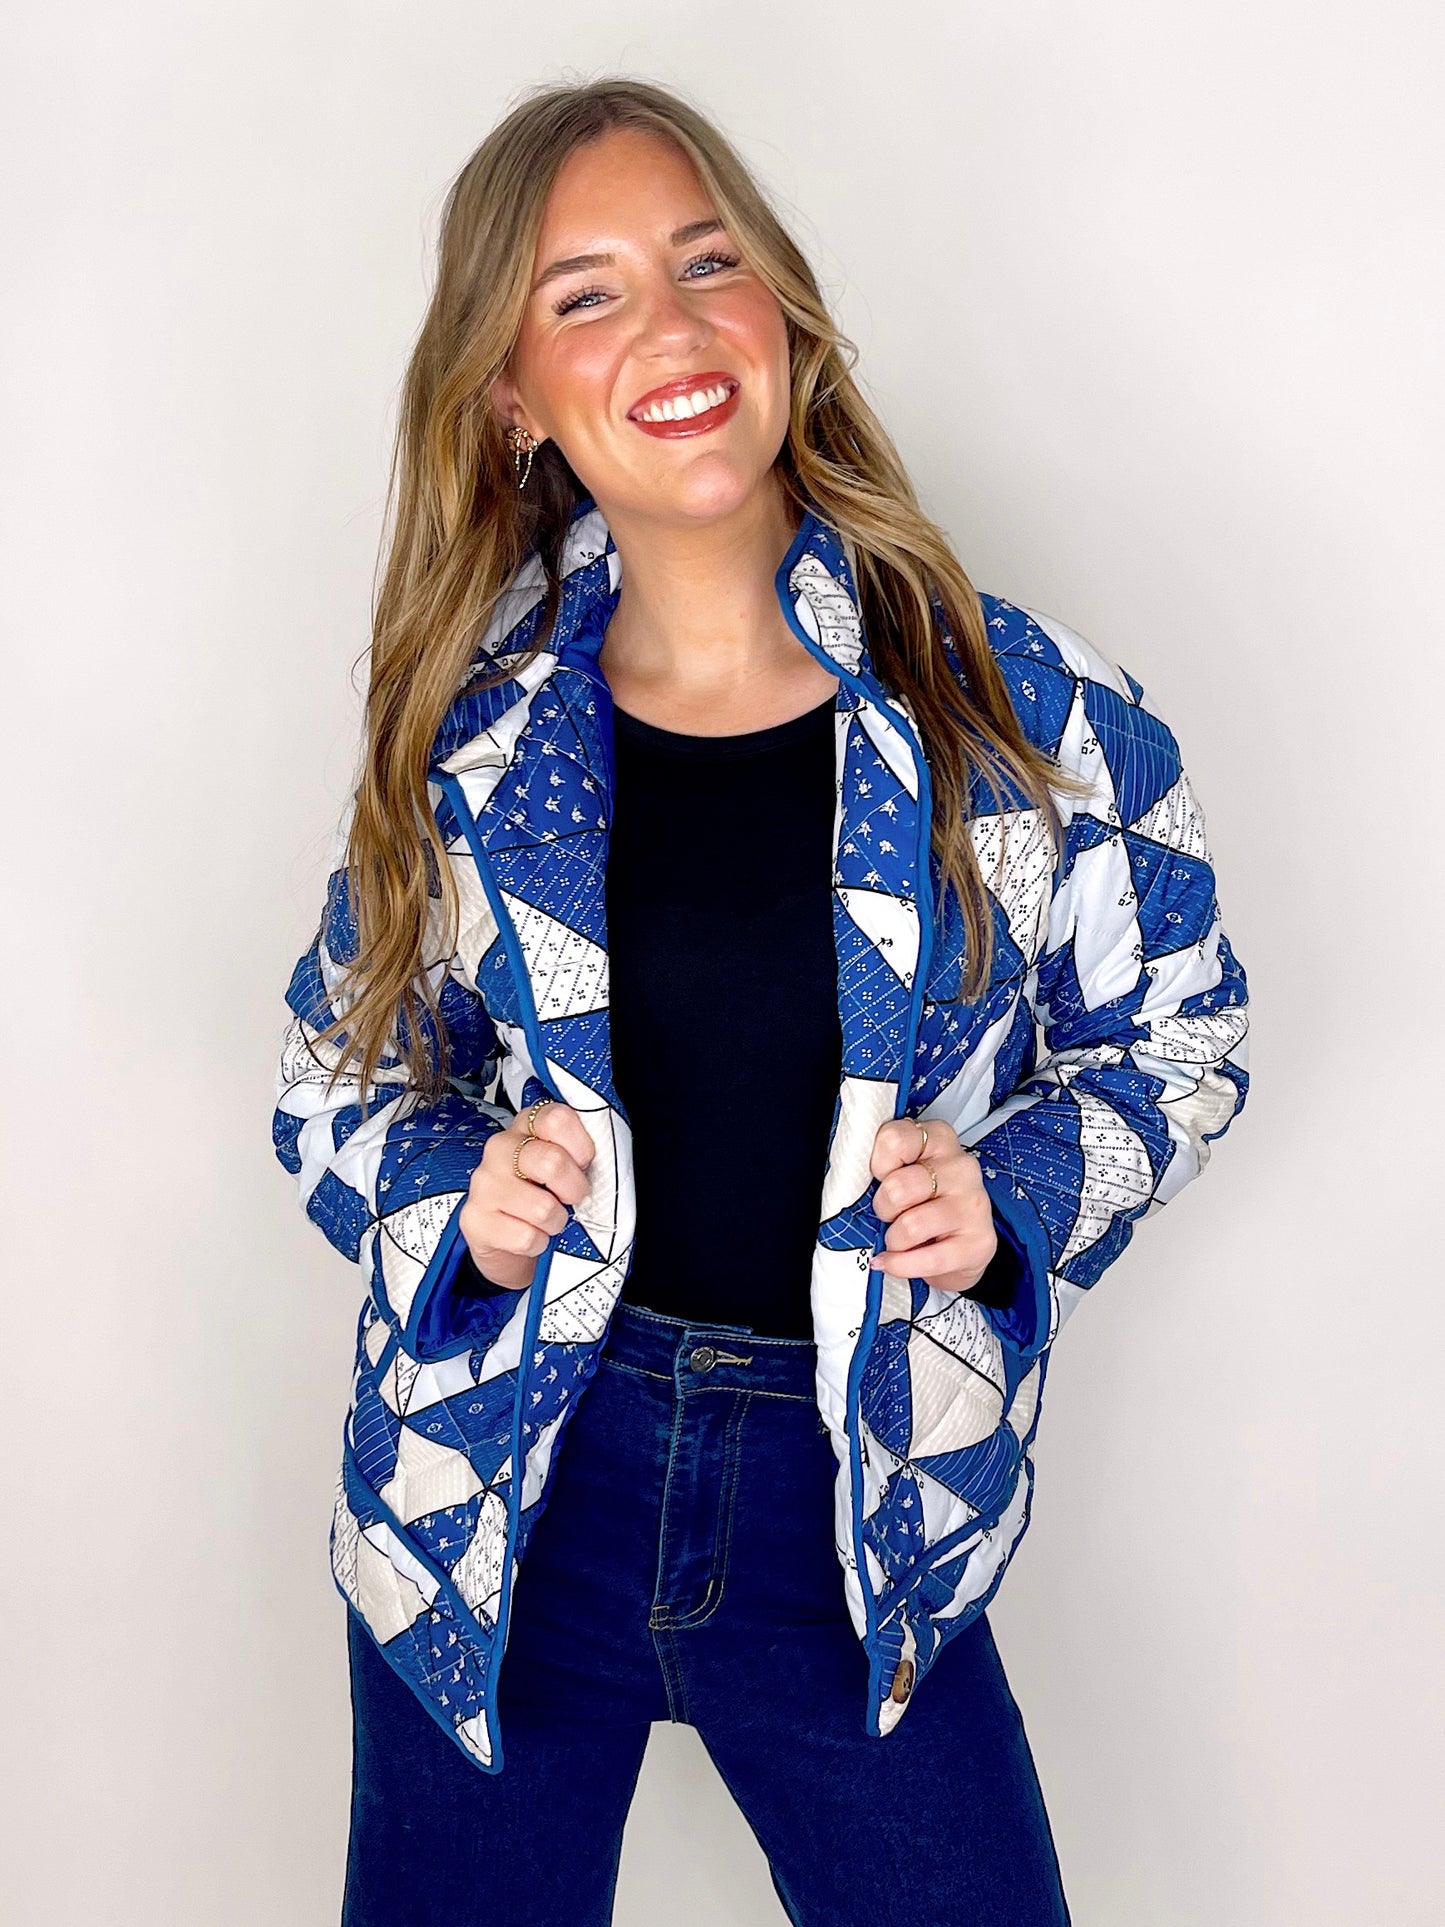 The Kit Quilted Jacket-Jackets-Sundayup-The Village Shoppe, Women’s Fashion Boutique, Shop Online and In Store - Located in Muscle Shoals, AL.